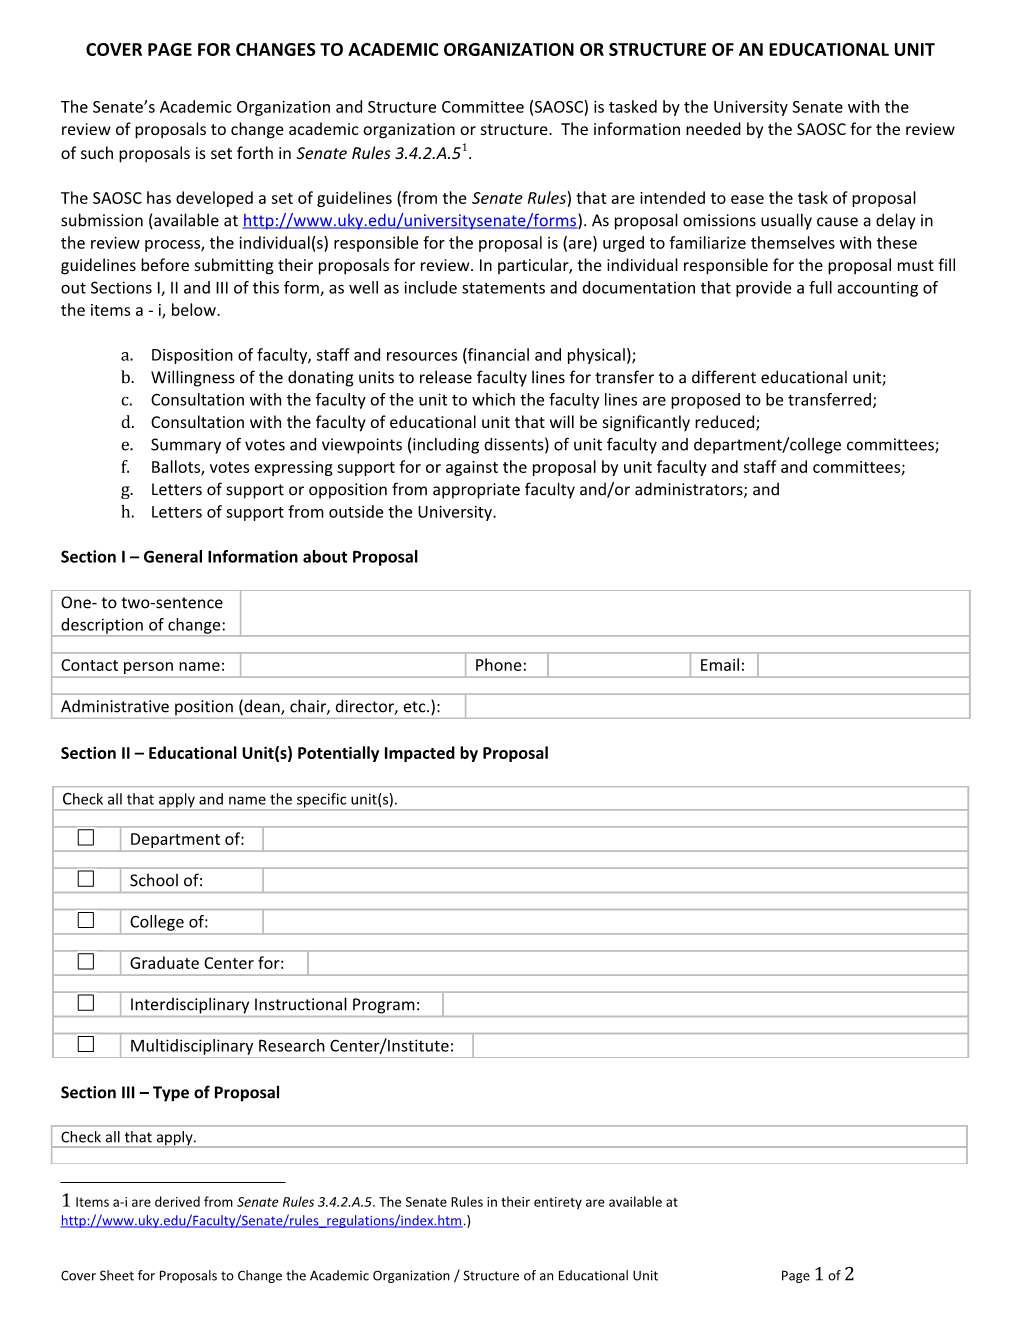 Senate-Approved Routing Form